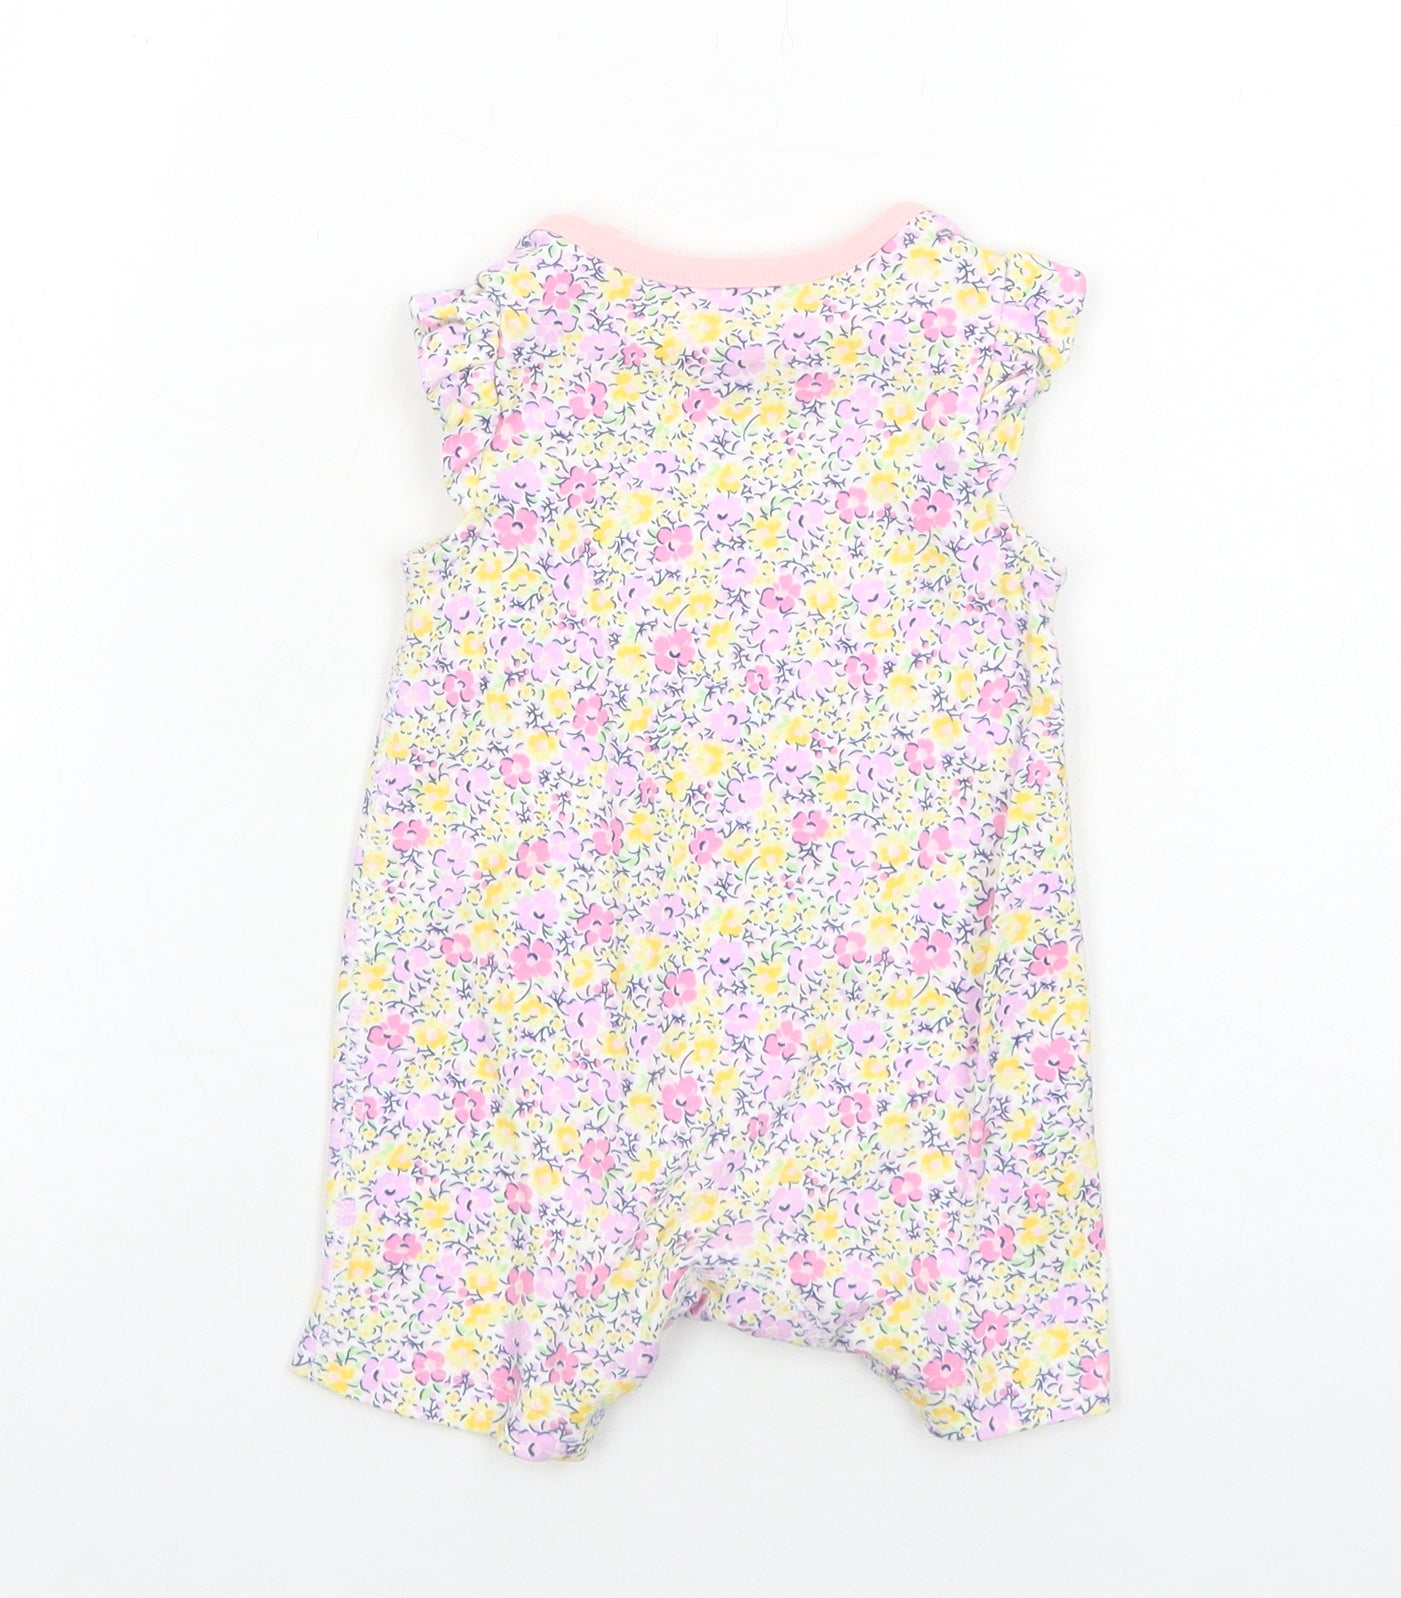 Mothercare Girls Pink Floral Cotton Romper One-Piece Size 0-3 Months Snap